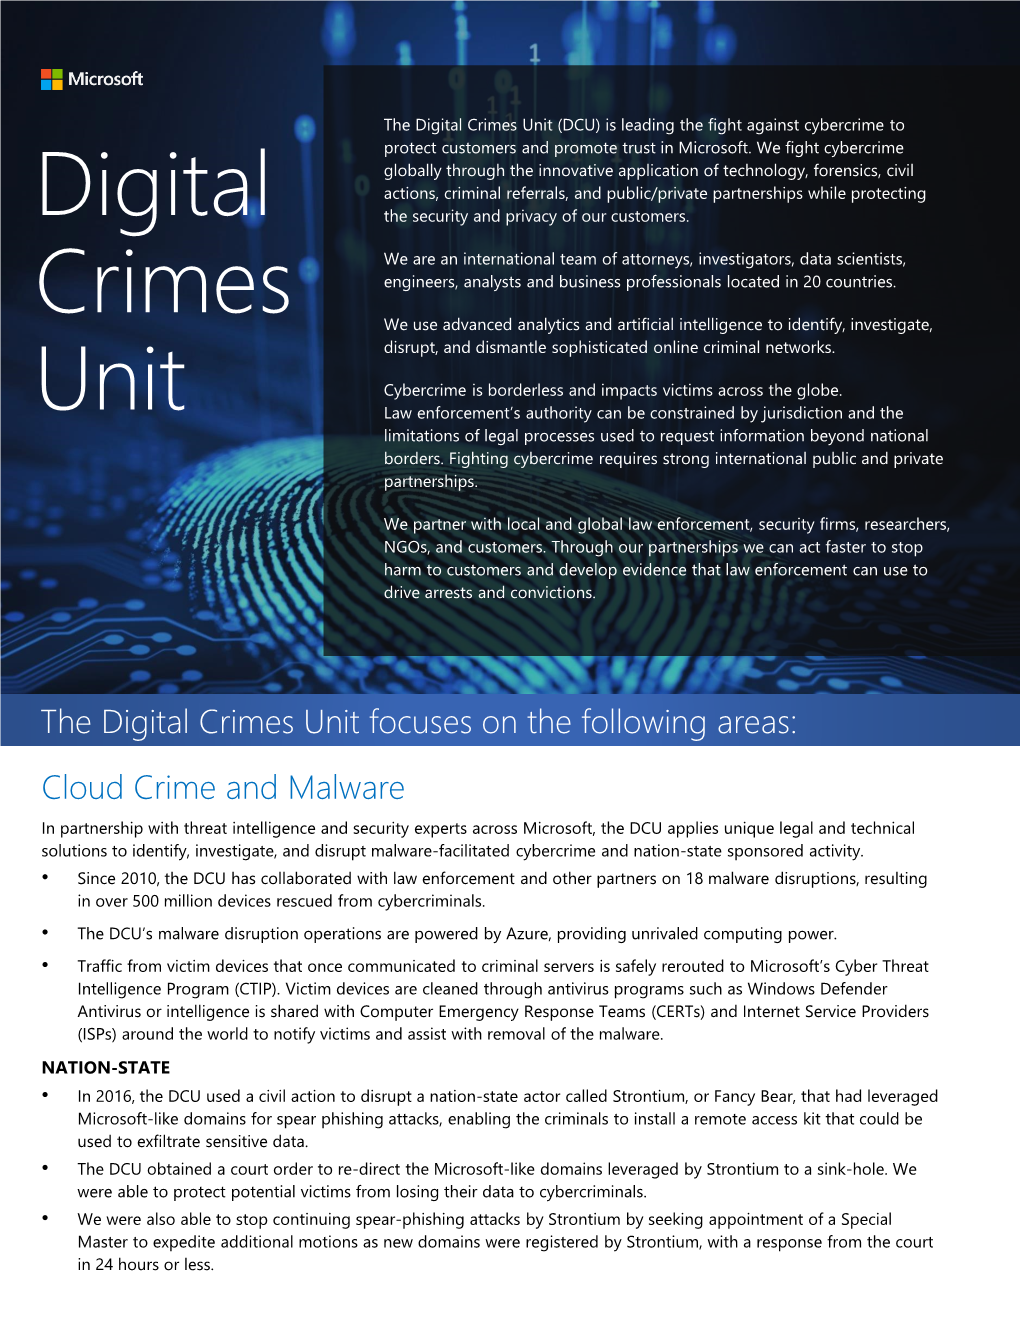 Digital Crimes Unit (DCU) Is Leading the Fight Against Cybercrime to Protect Customers and Promote Trust in Microsoft